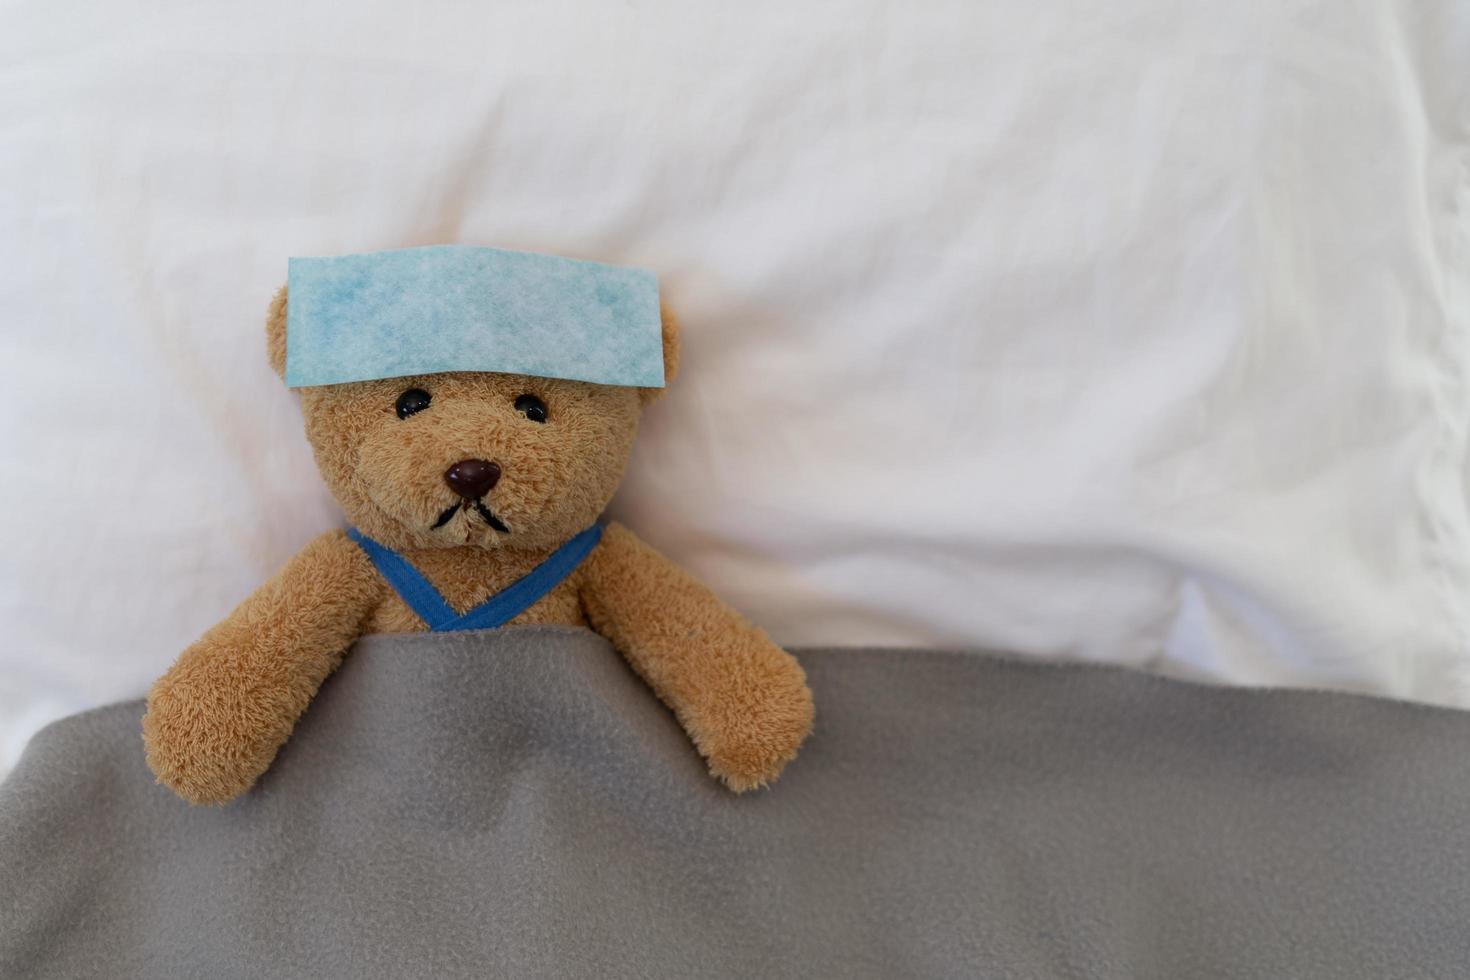 A sad teddy bear lies sick in bed with disappointment and discouragement photo